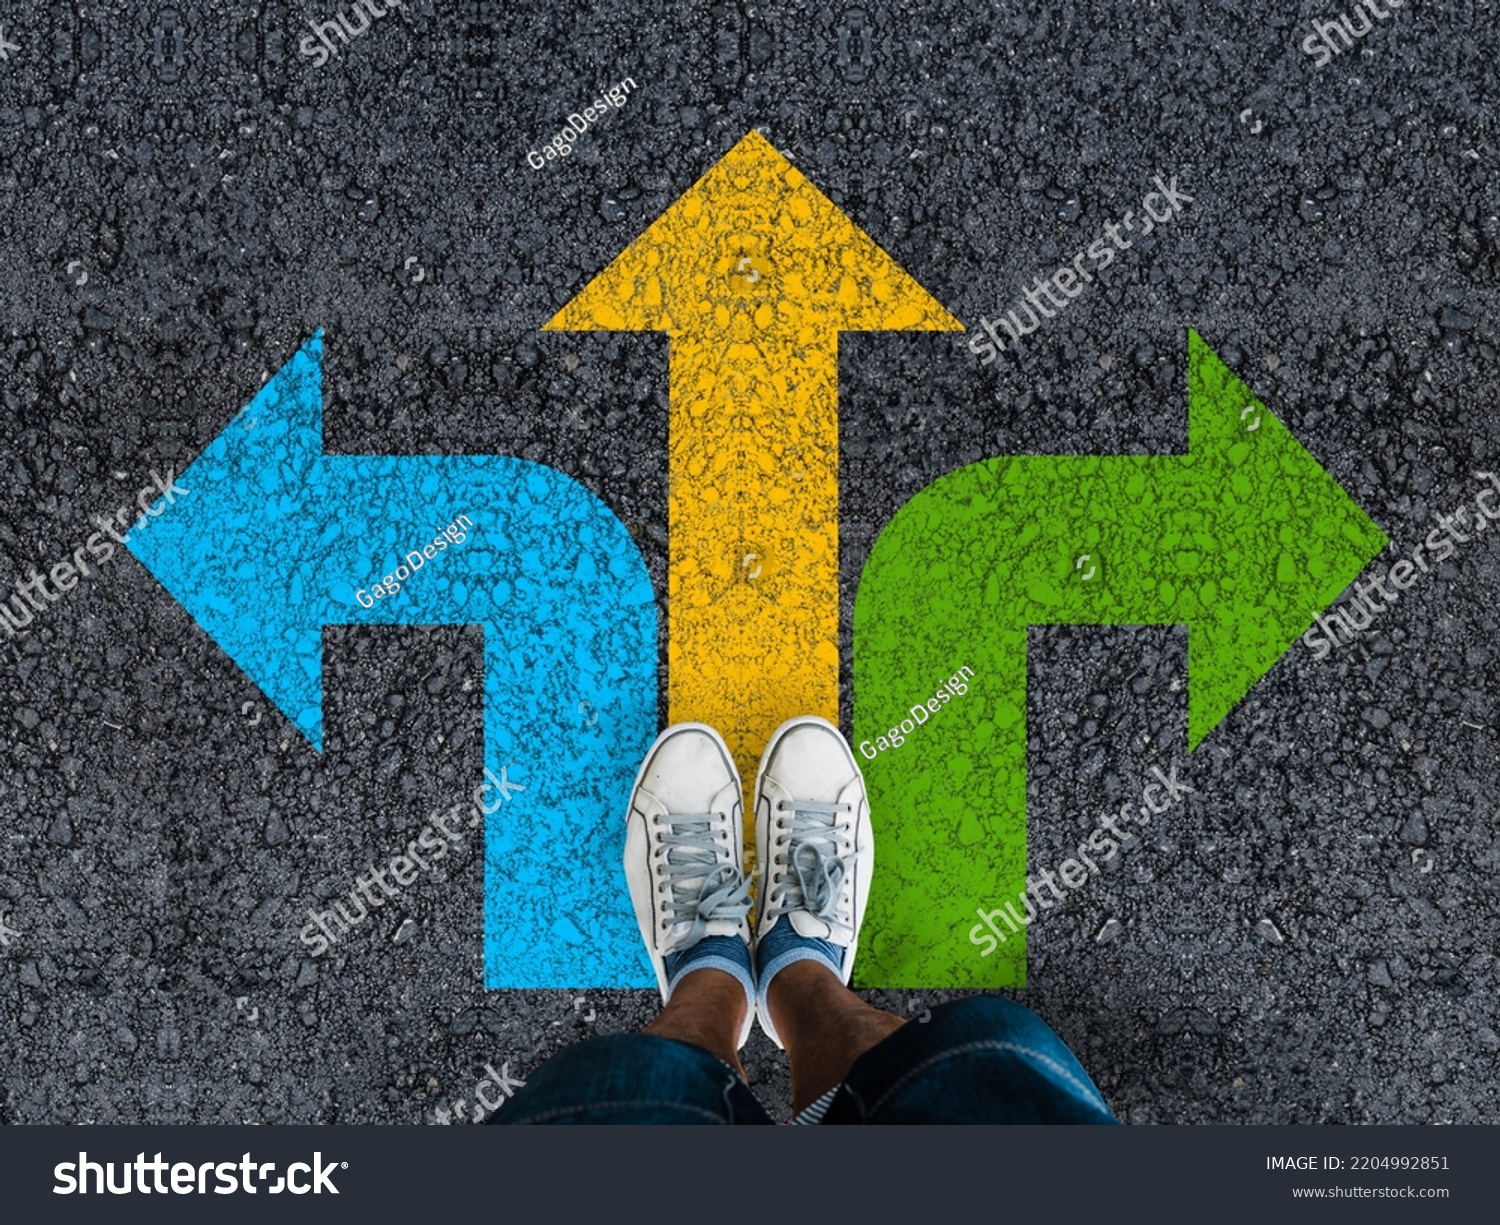  man legs in sneakers standing on road with three direction arrow choices, left, right or move forward  #2204992851